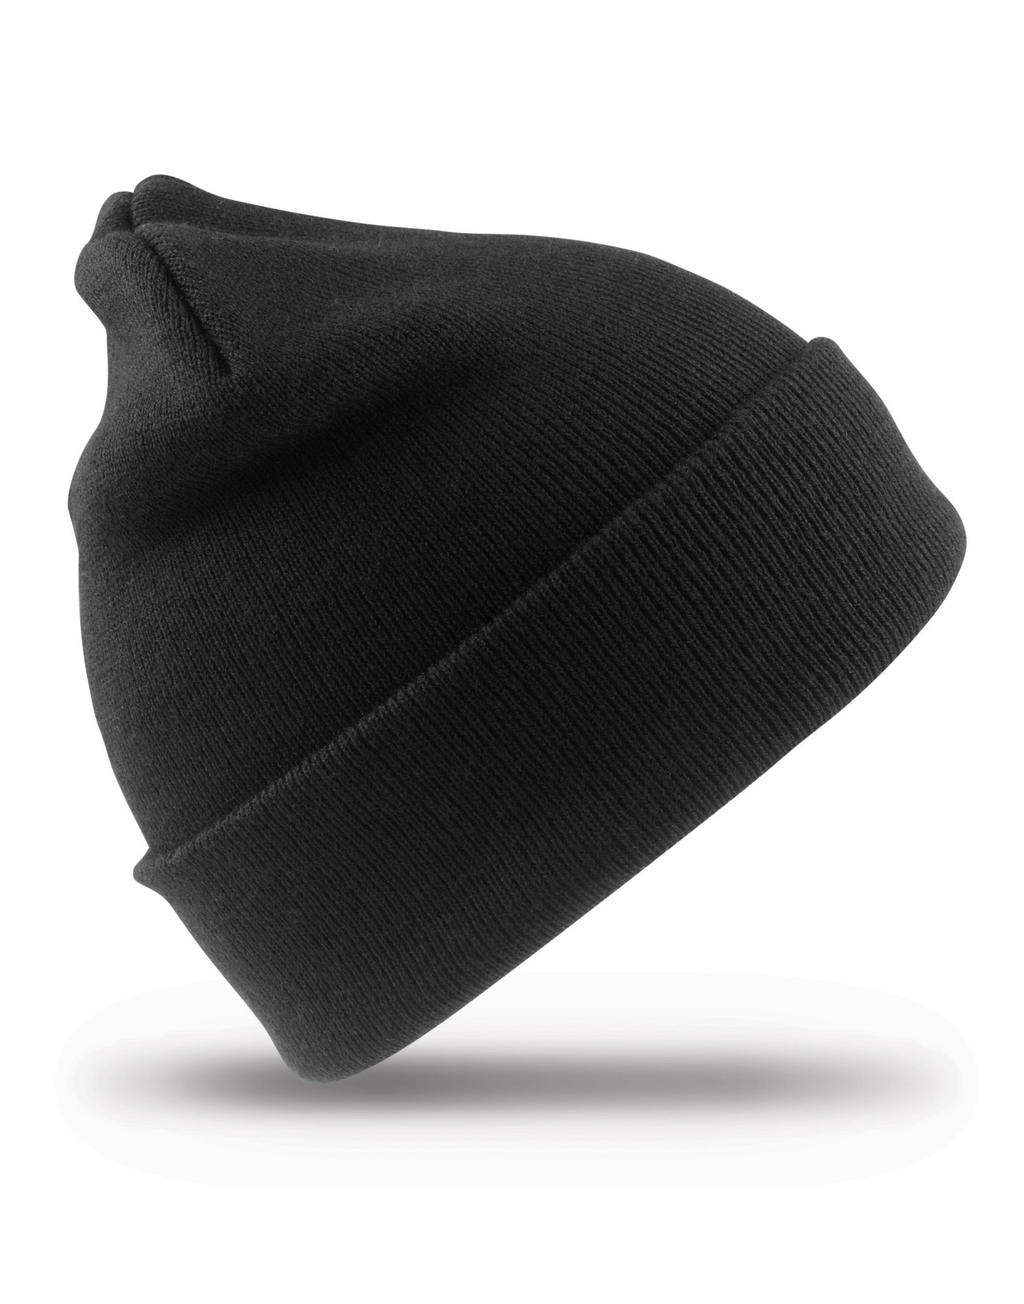  Recycled Woolly Ski Hat in Farbe Black